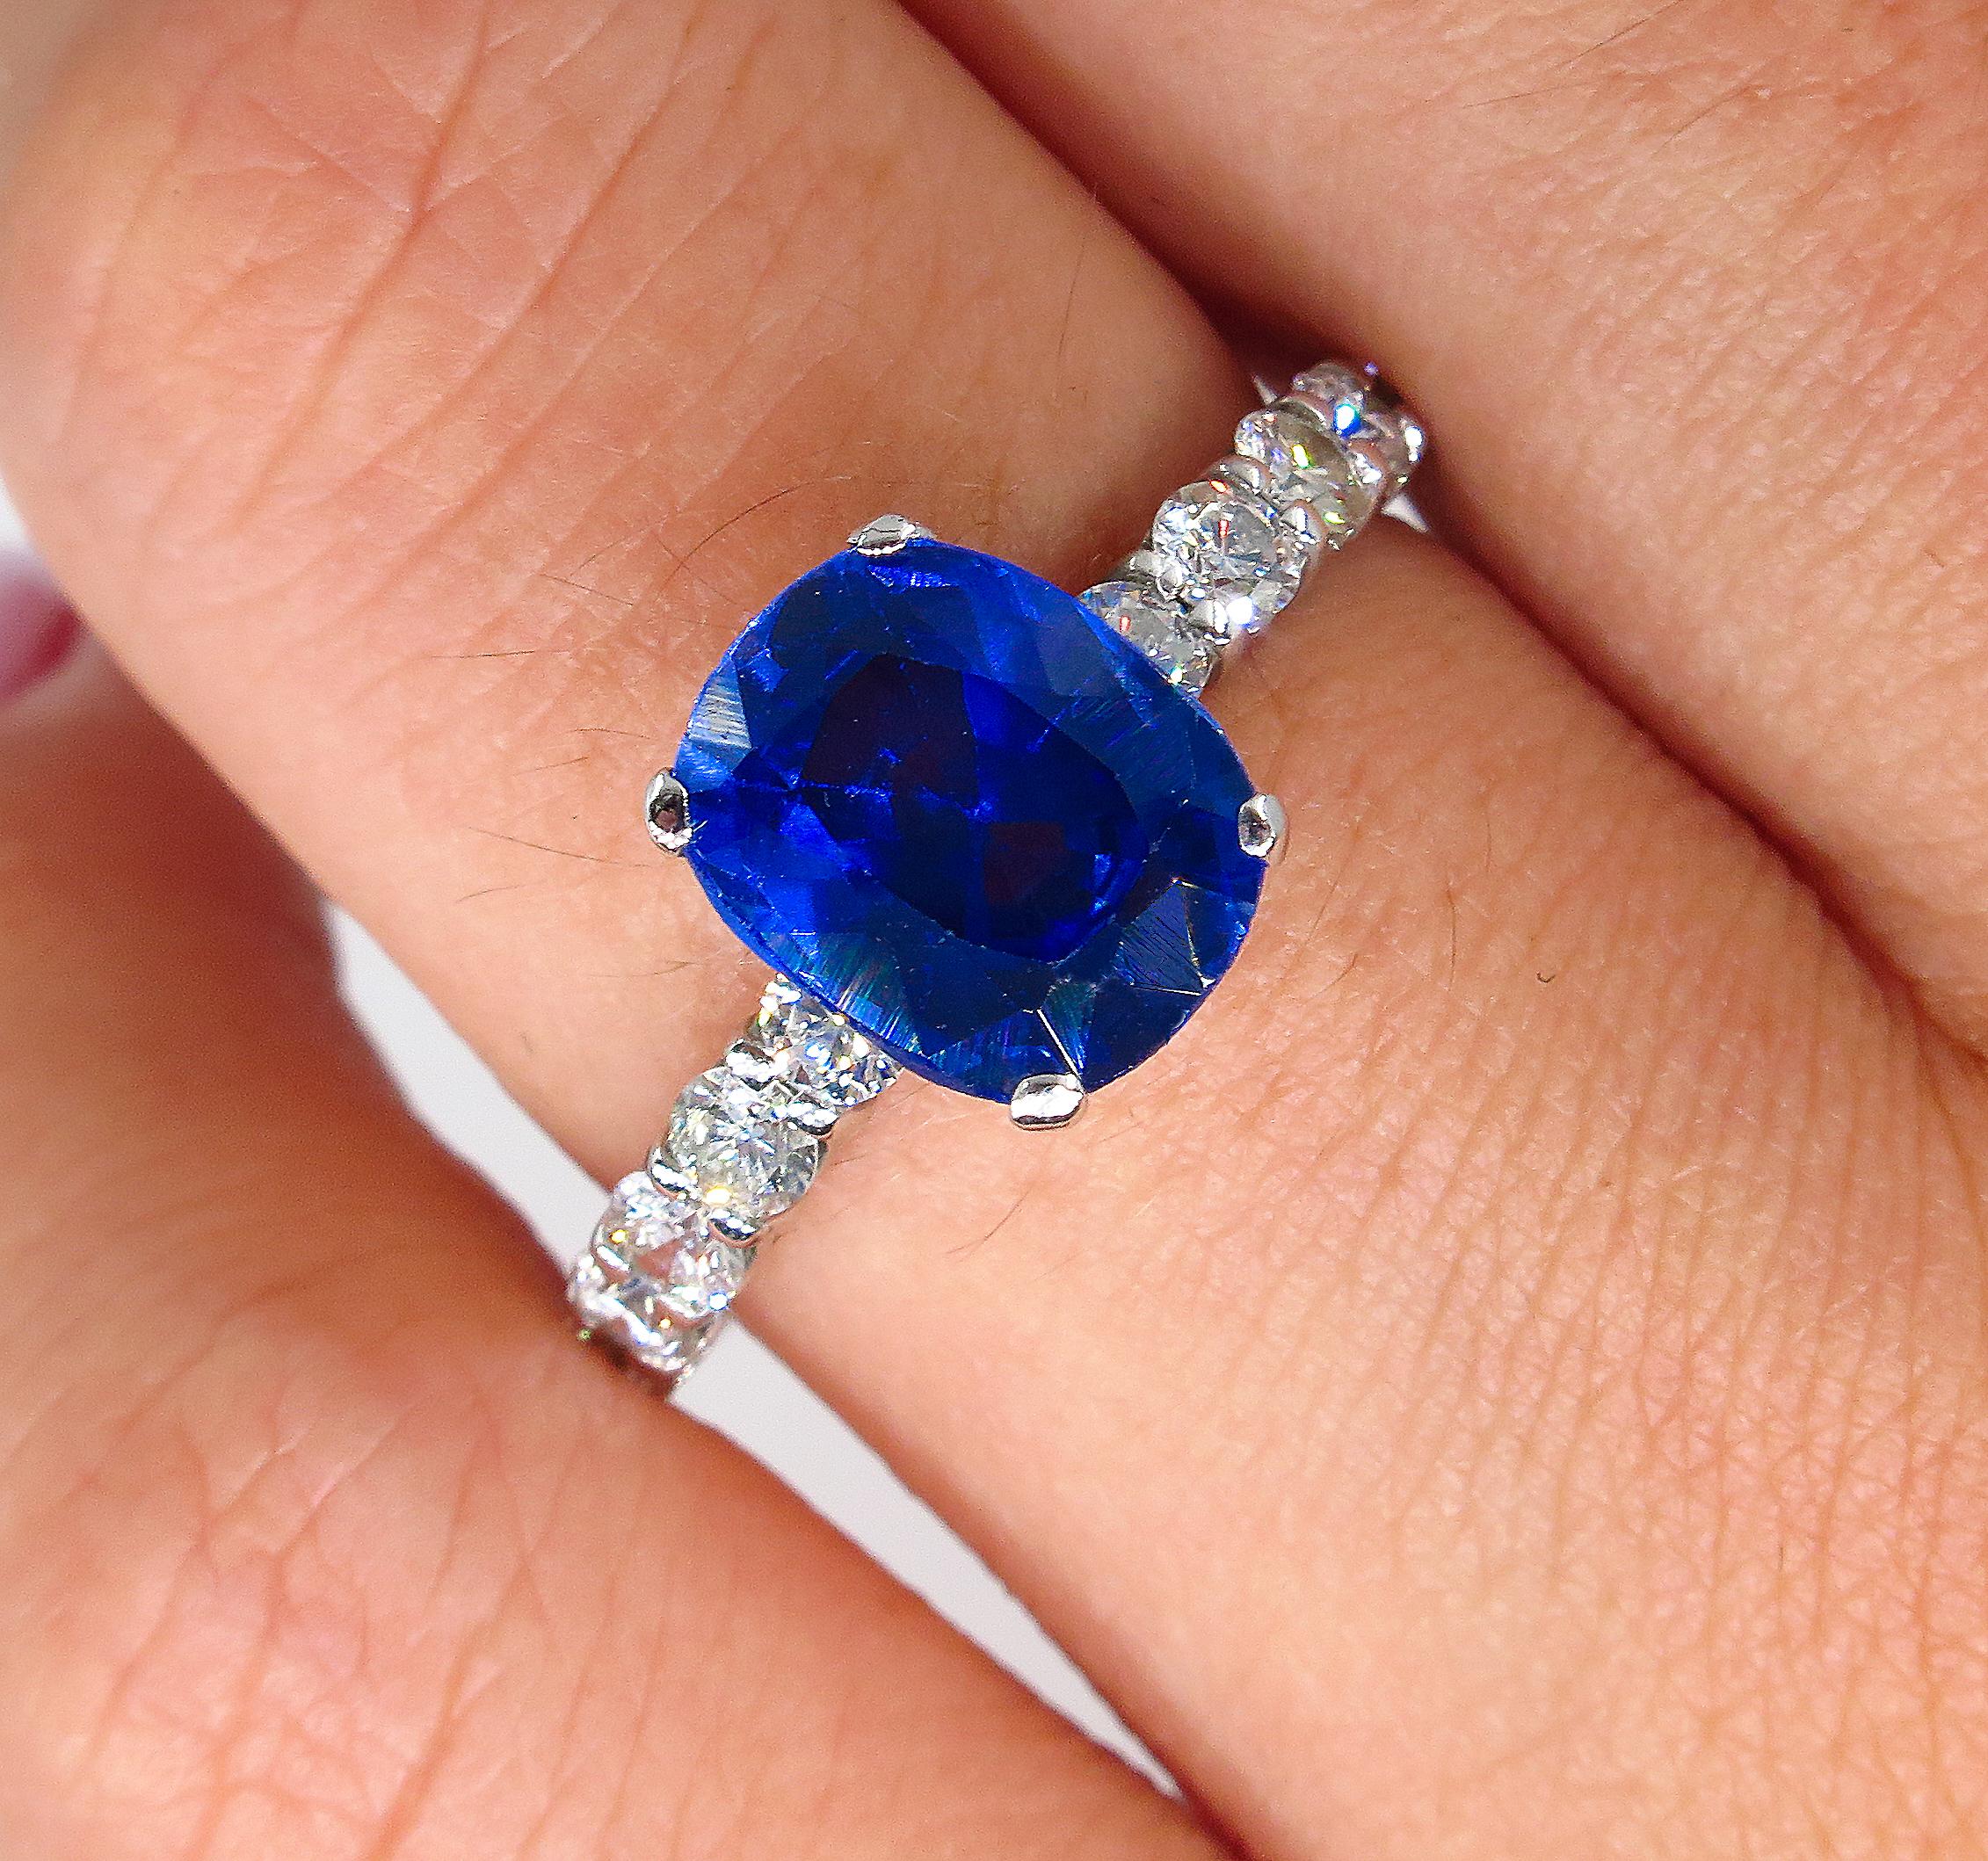 A Classic Style GIA certified Synthetic Cushion Shaped Blue Sapphire accented by sparkling round diamonds Ring. A wonderful Vintage Estate Jewel.
The impressive Midnight Blue gemstone shows all its weight in a graceful Cushion shape, measuring